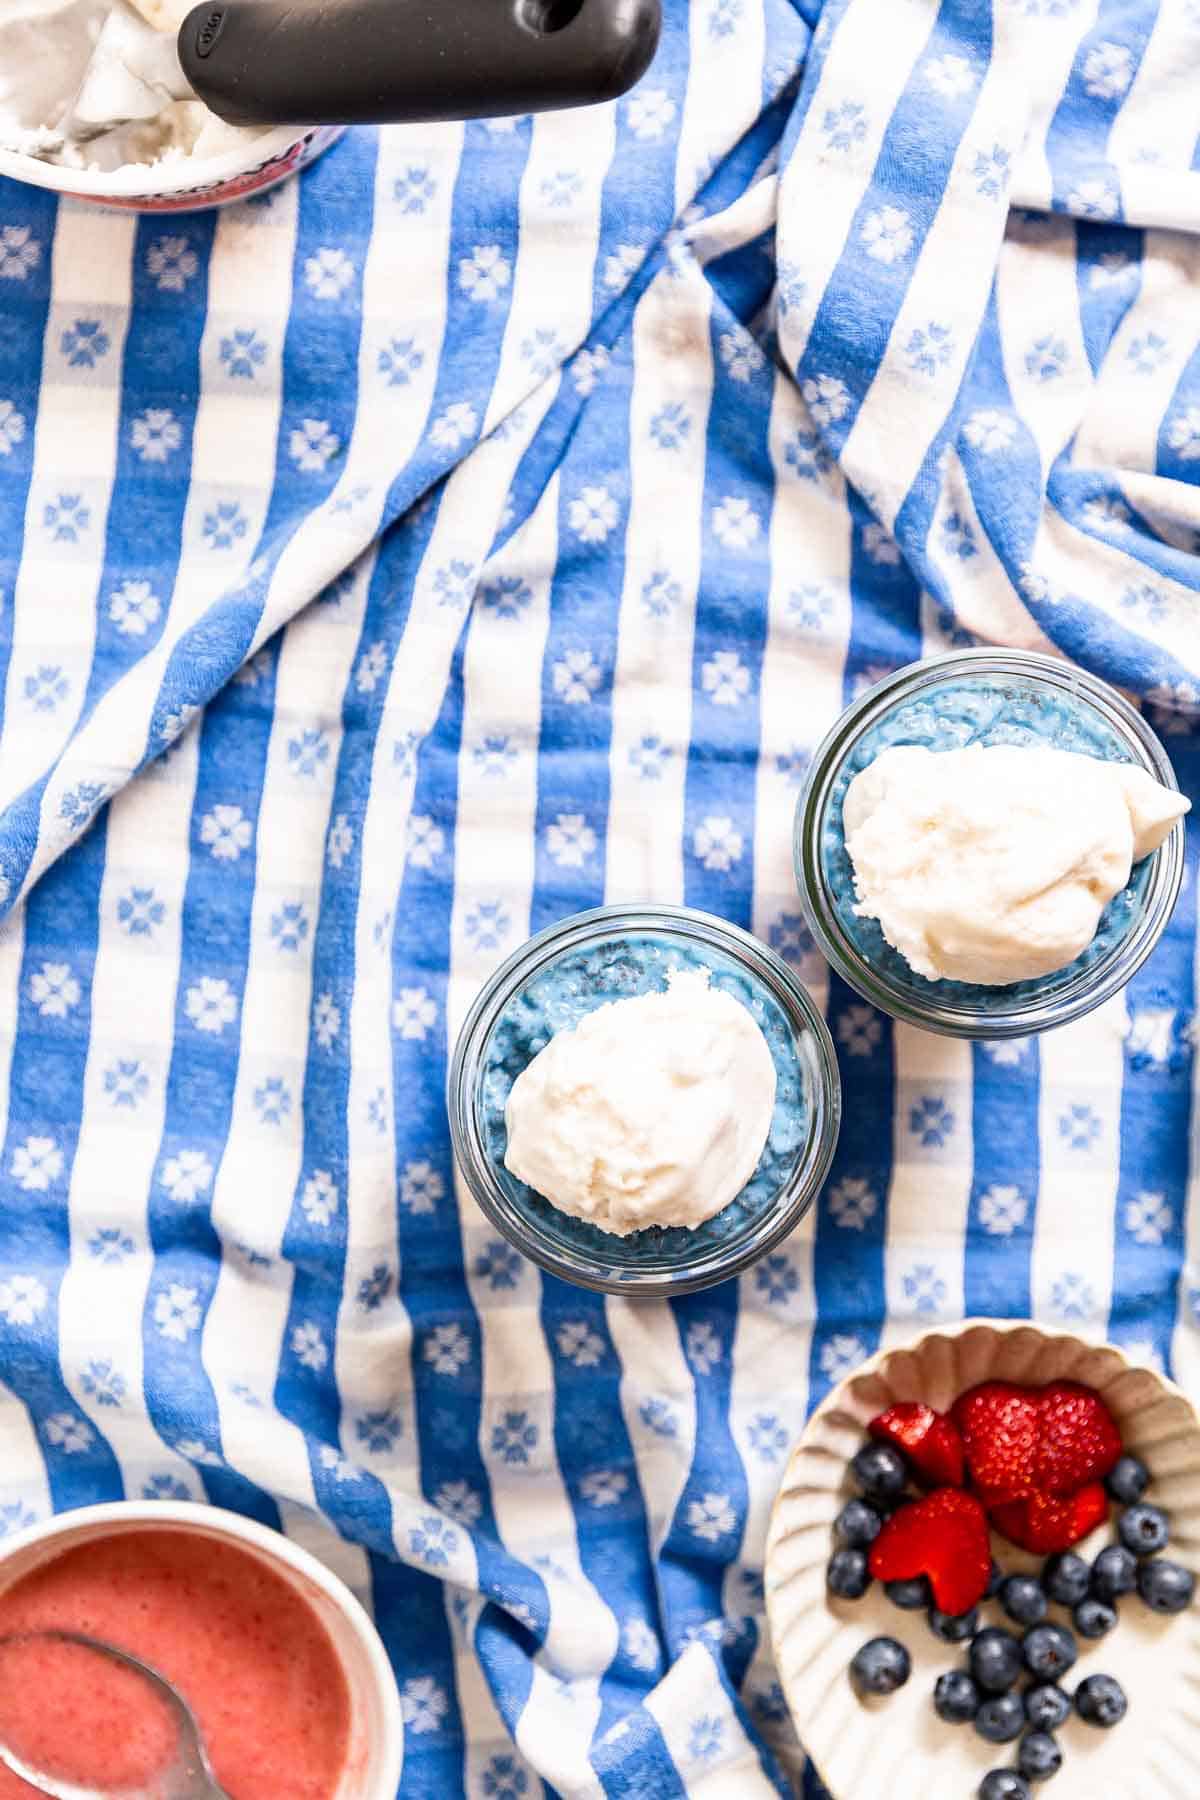 Whipped cream on top of blue chia yogurt on a blue gingham tablecloth.